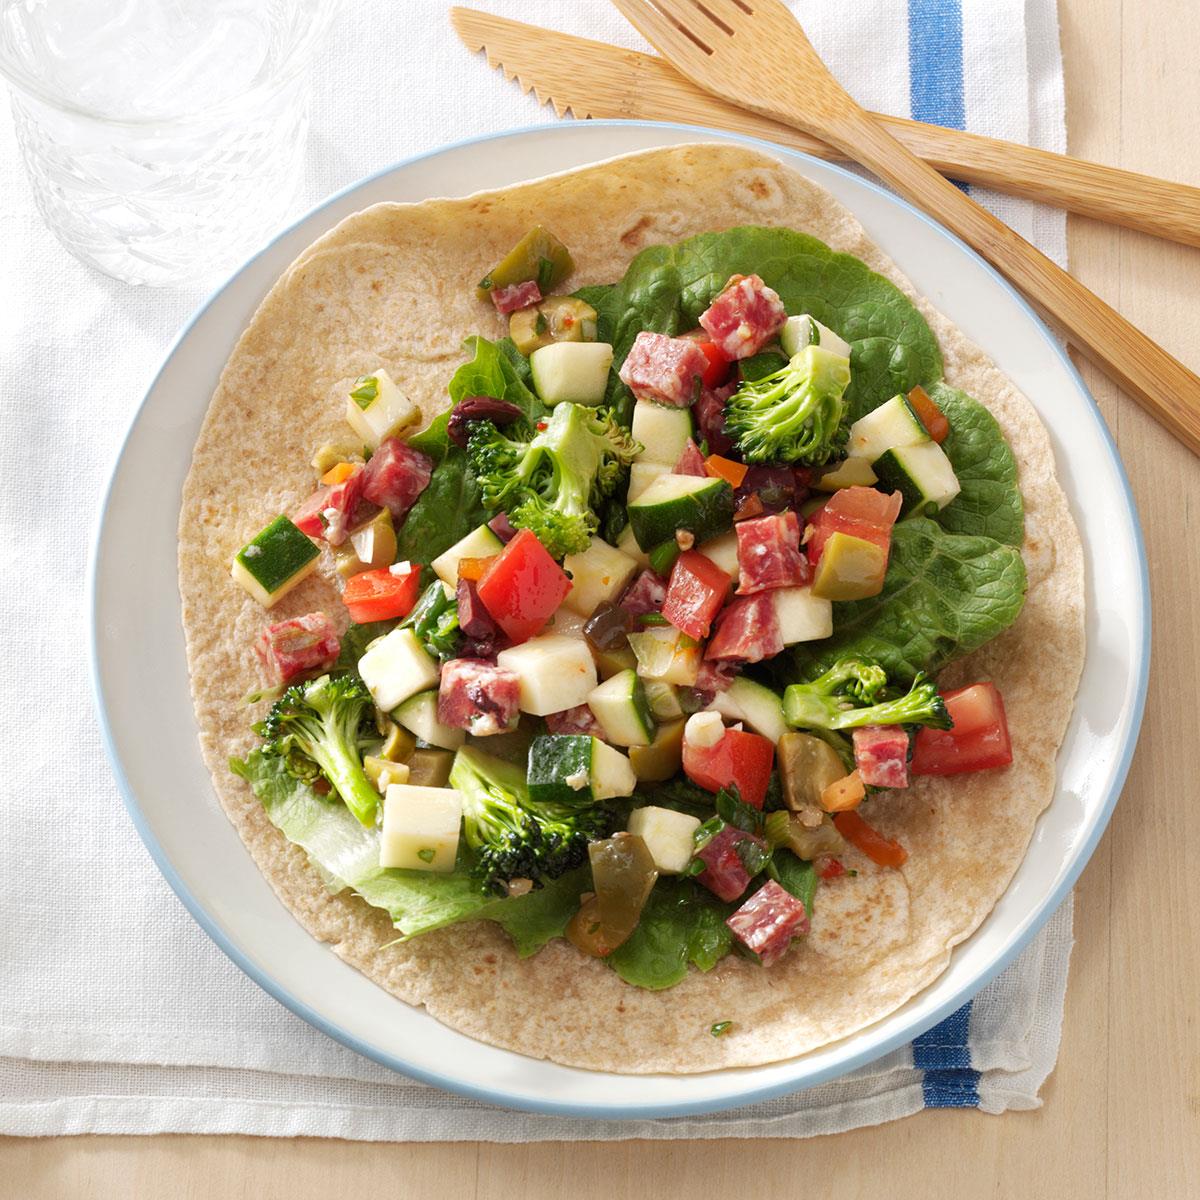 Yummy! There are so many great flavors and textures in these wraps. Feel free to experiment with the ingredients—use mozzarella, pepperoni or any combo you like. —Maria Simmons, Rio Rancho, New Mexico <a href="https://www.tasteofhome.com/recipes/italian-style-veggie-wraps/">Get Recipe</a>